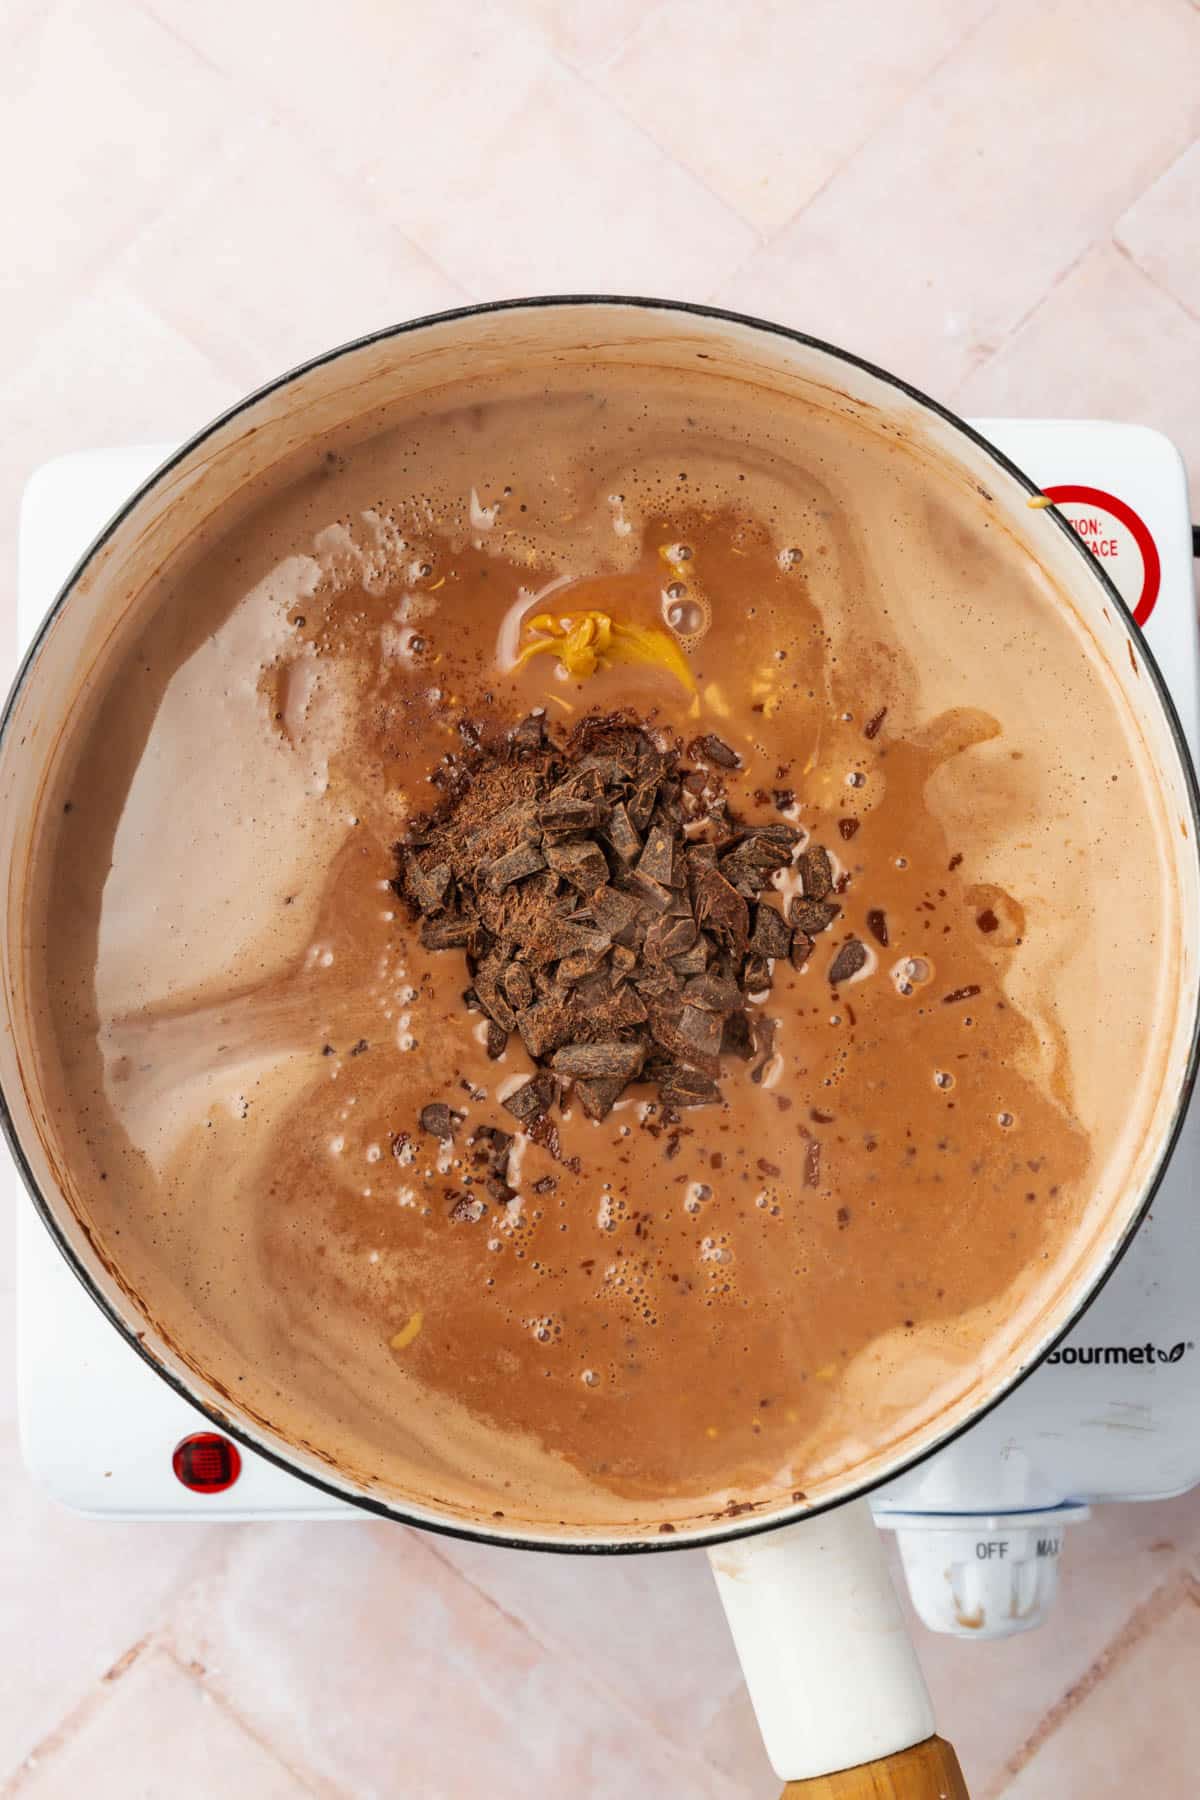 A white saucepan with chocolate custard, peanut butter, and chopped chocolate.